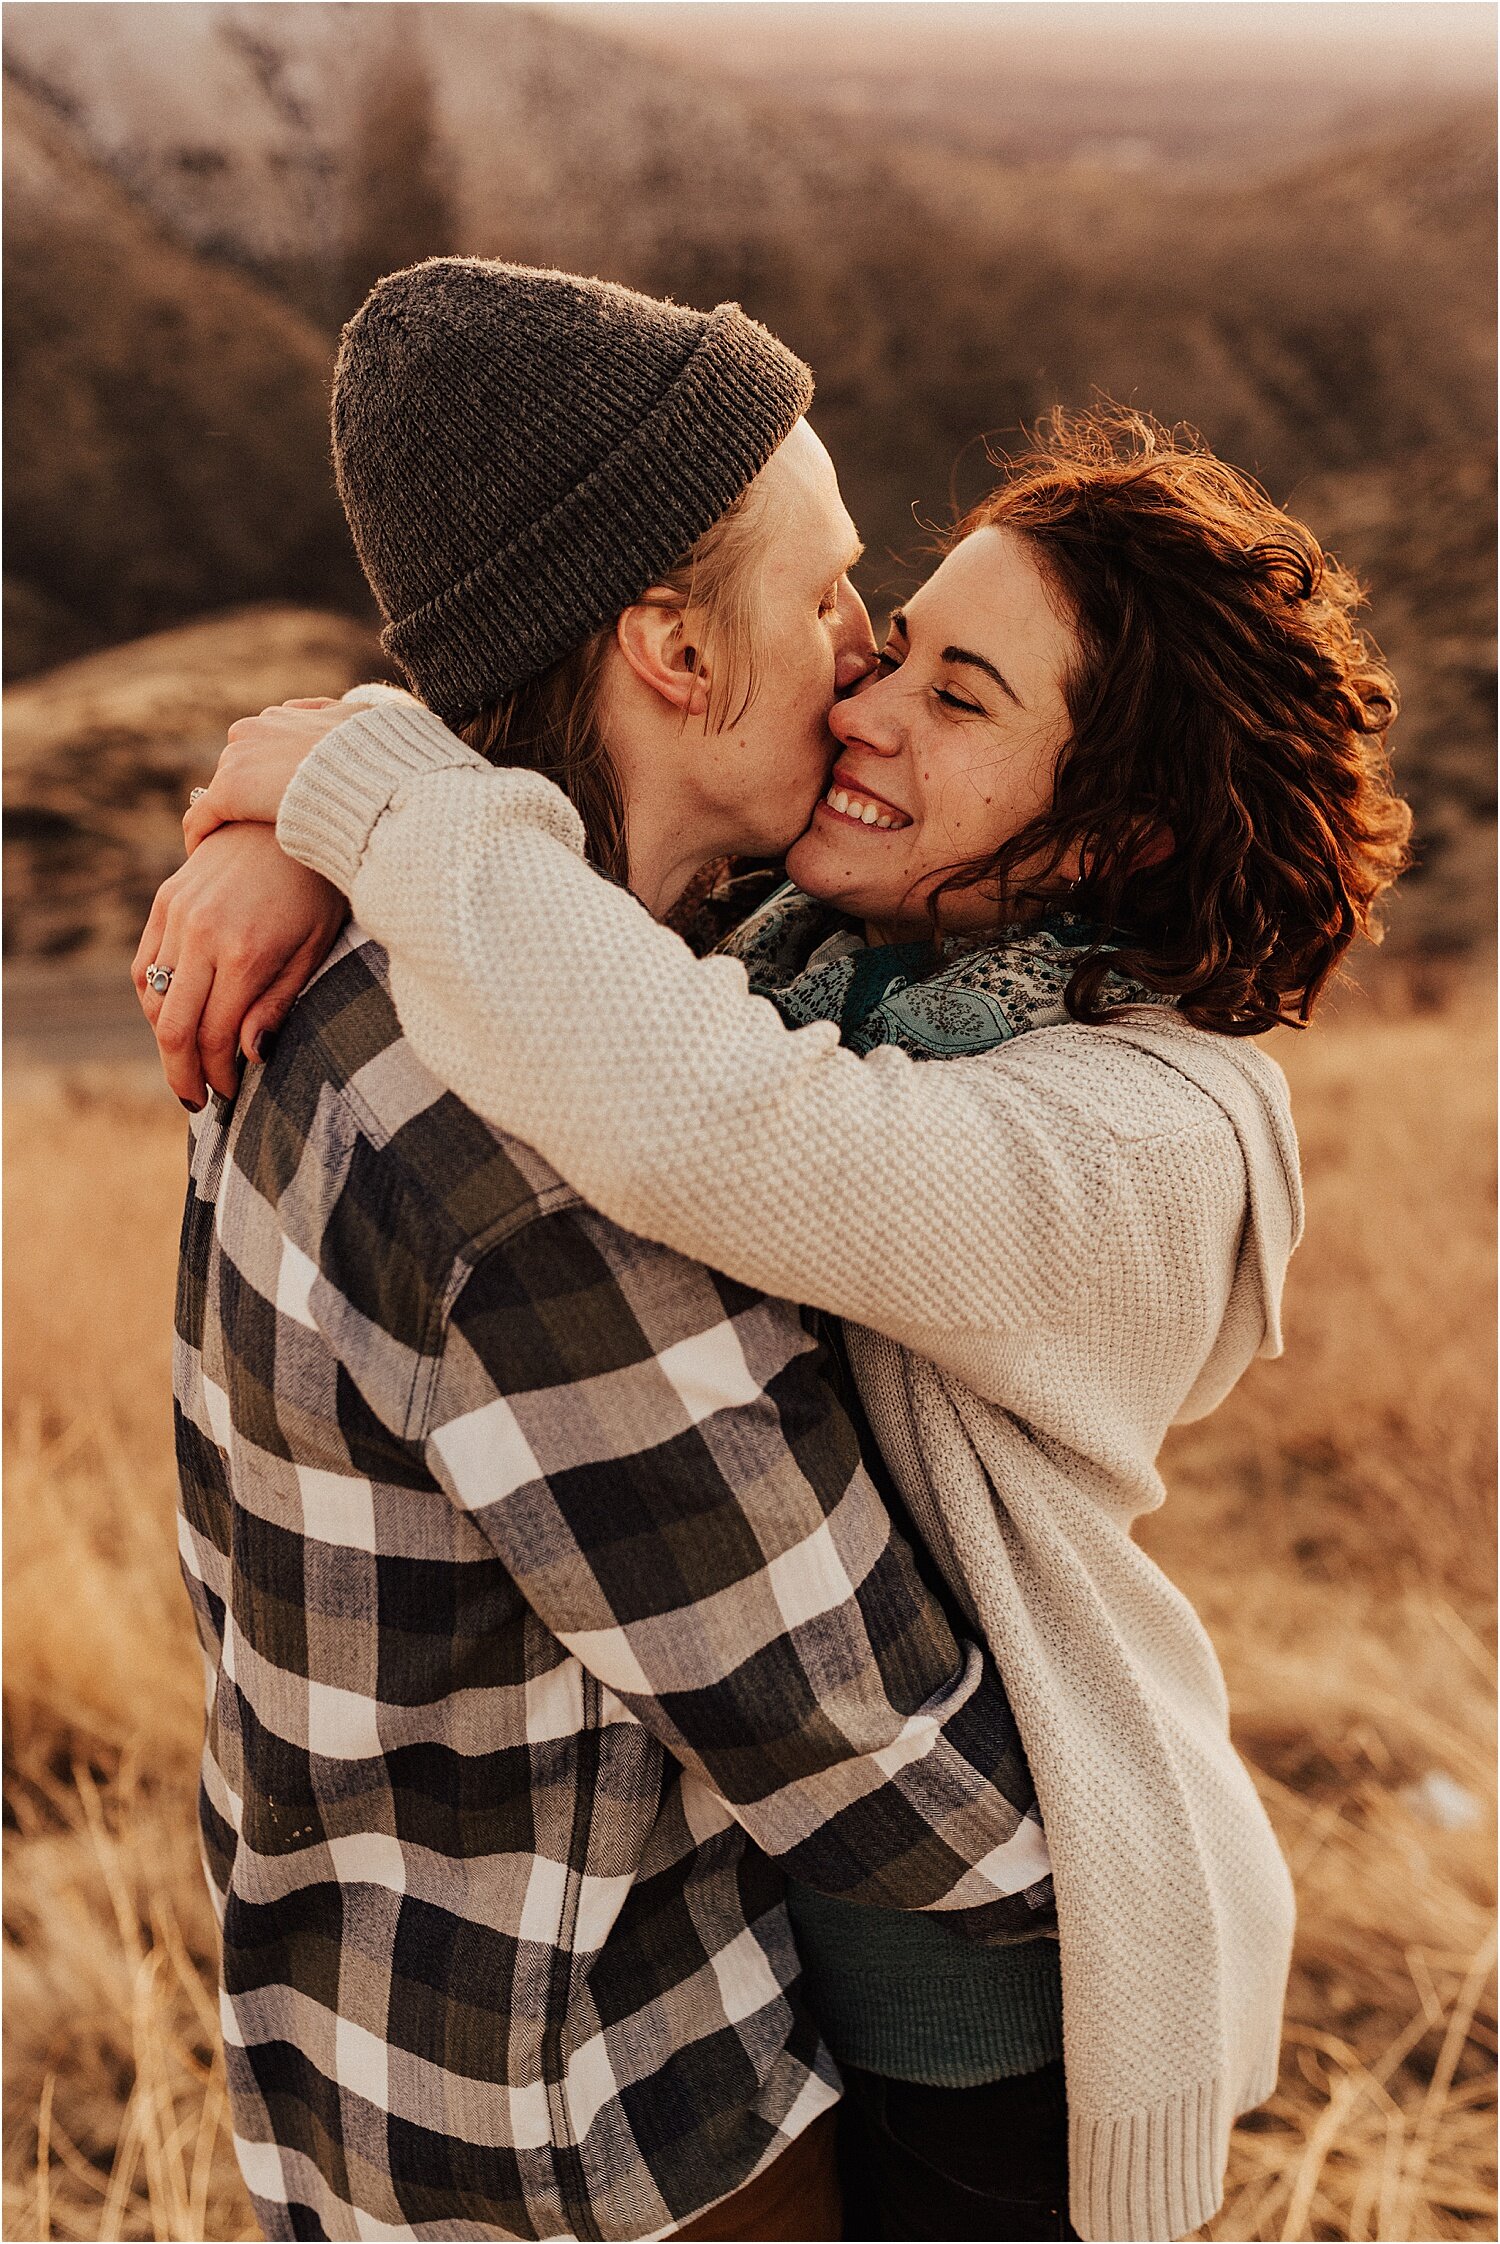 brewery foothills winter engagement session boise idaho26.jpg